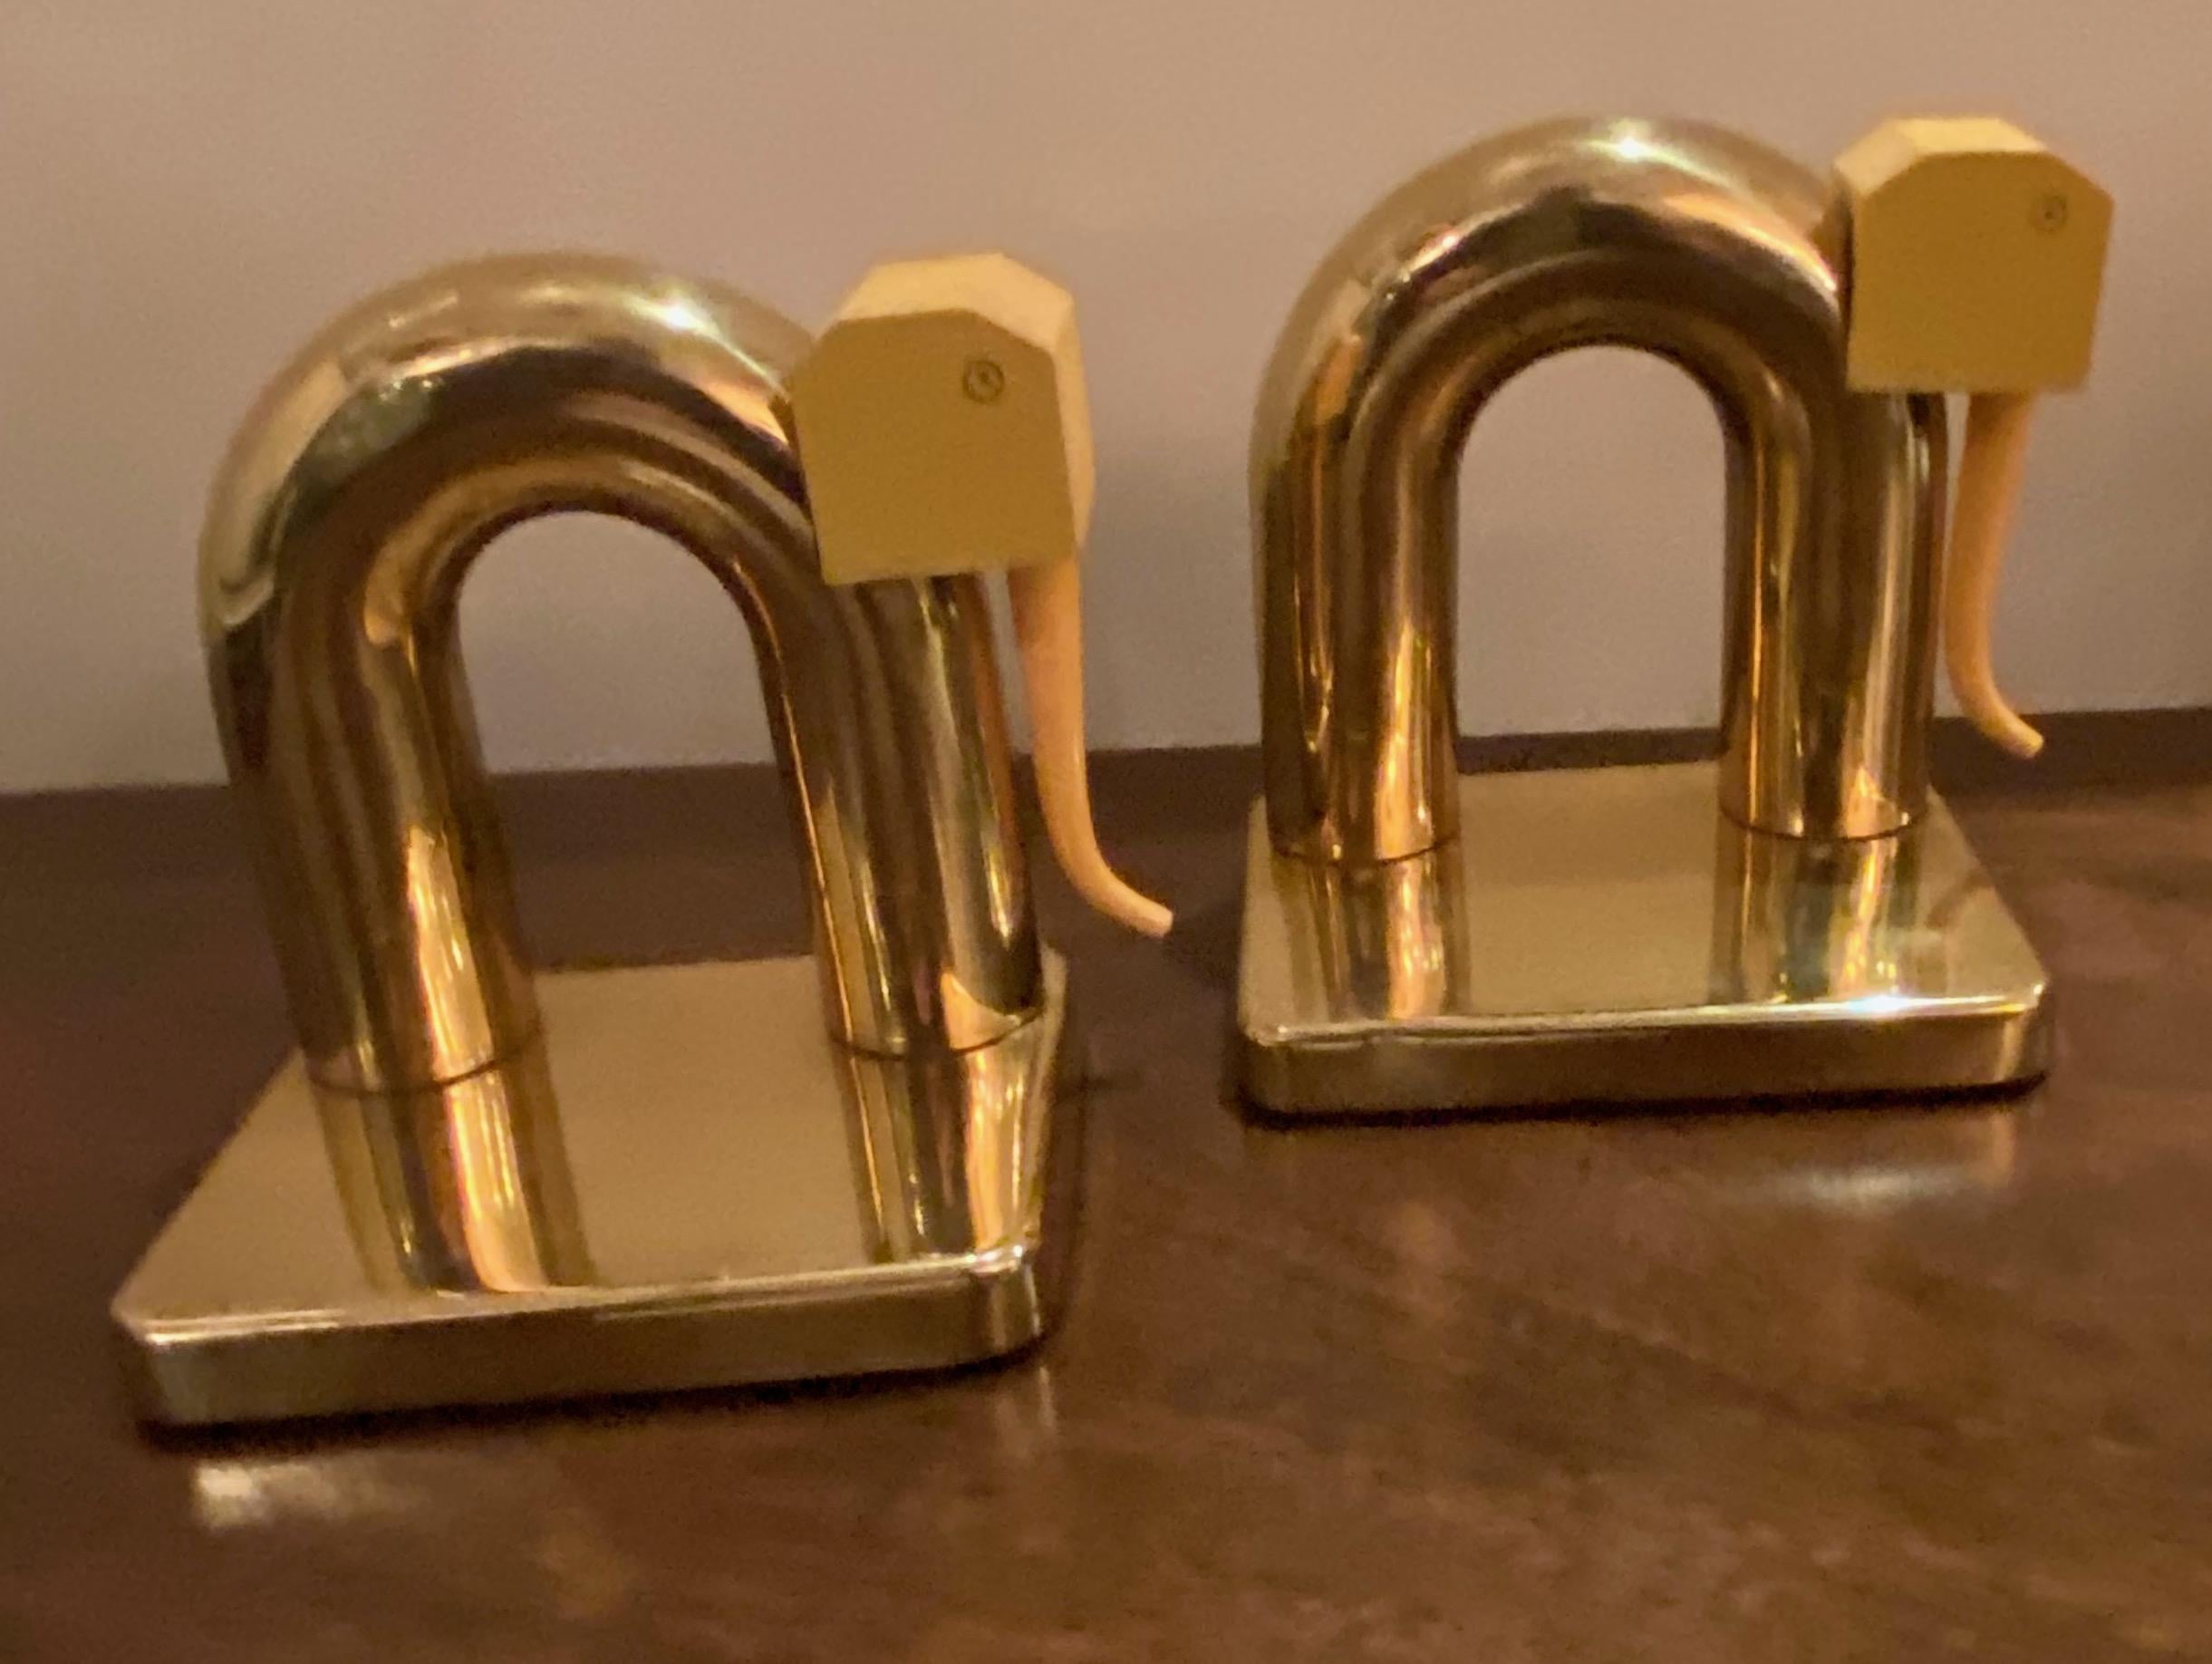 A very rare pair of Chase Brass and Bakelite elephant bookends. Important design by famous industrial design pioneer Walter Von Nessen who worked for Chase and designed many of the company’s most important streamline art deco objects of period.